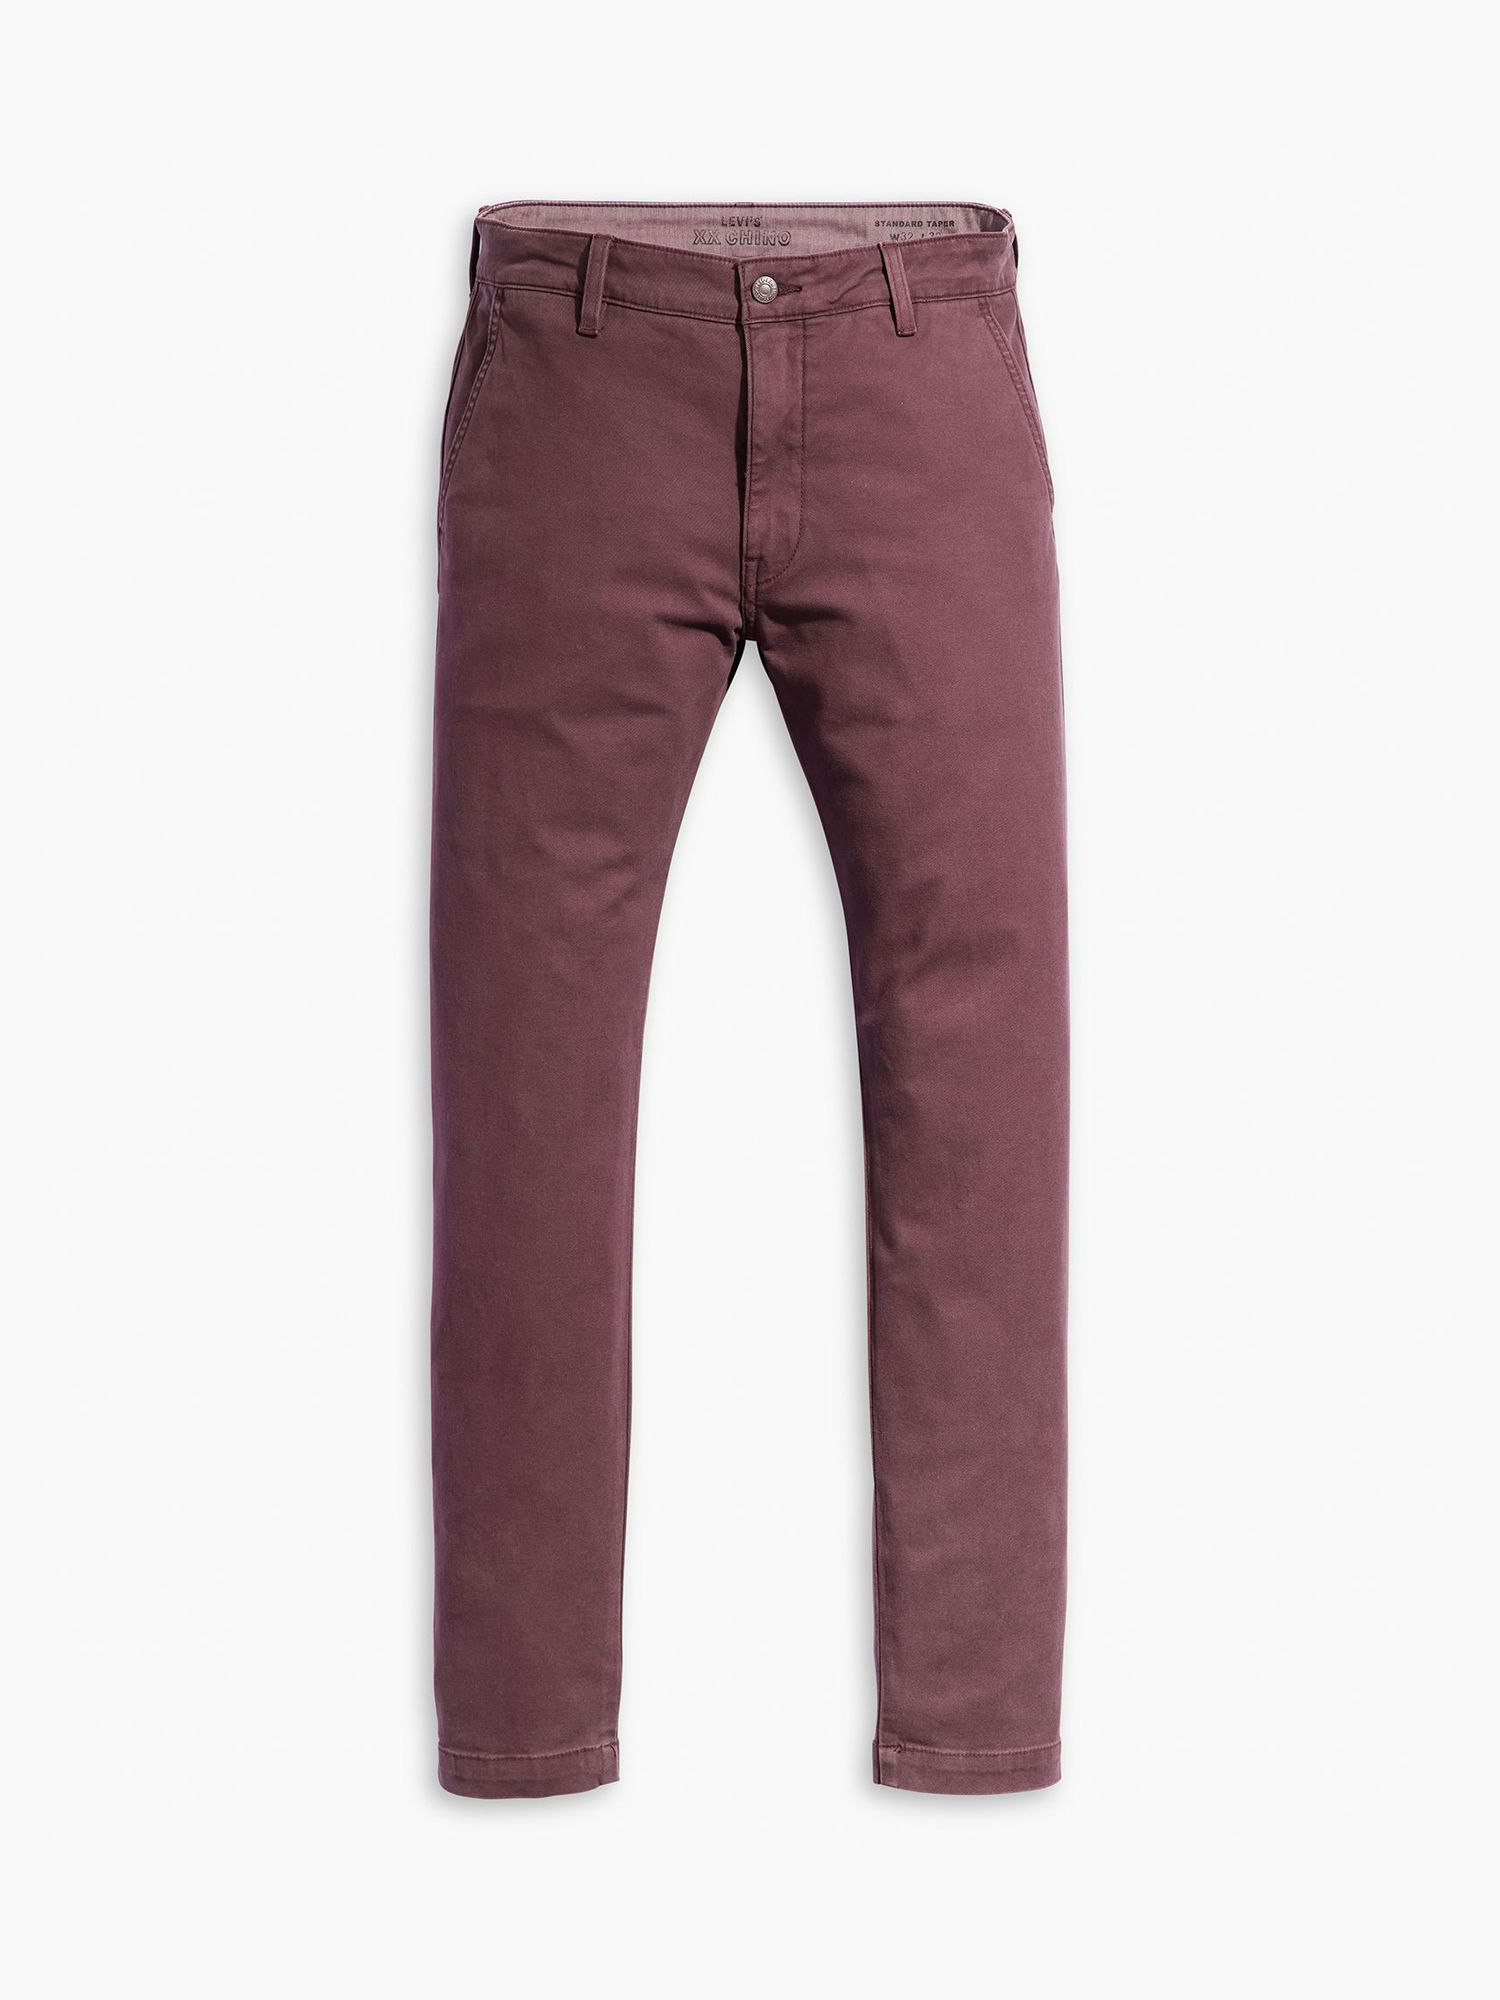 Levi's XX Chino Standard Taper Trousers, Red at John Lewis & Partners